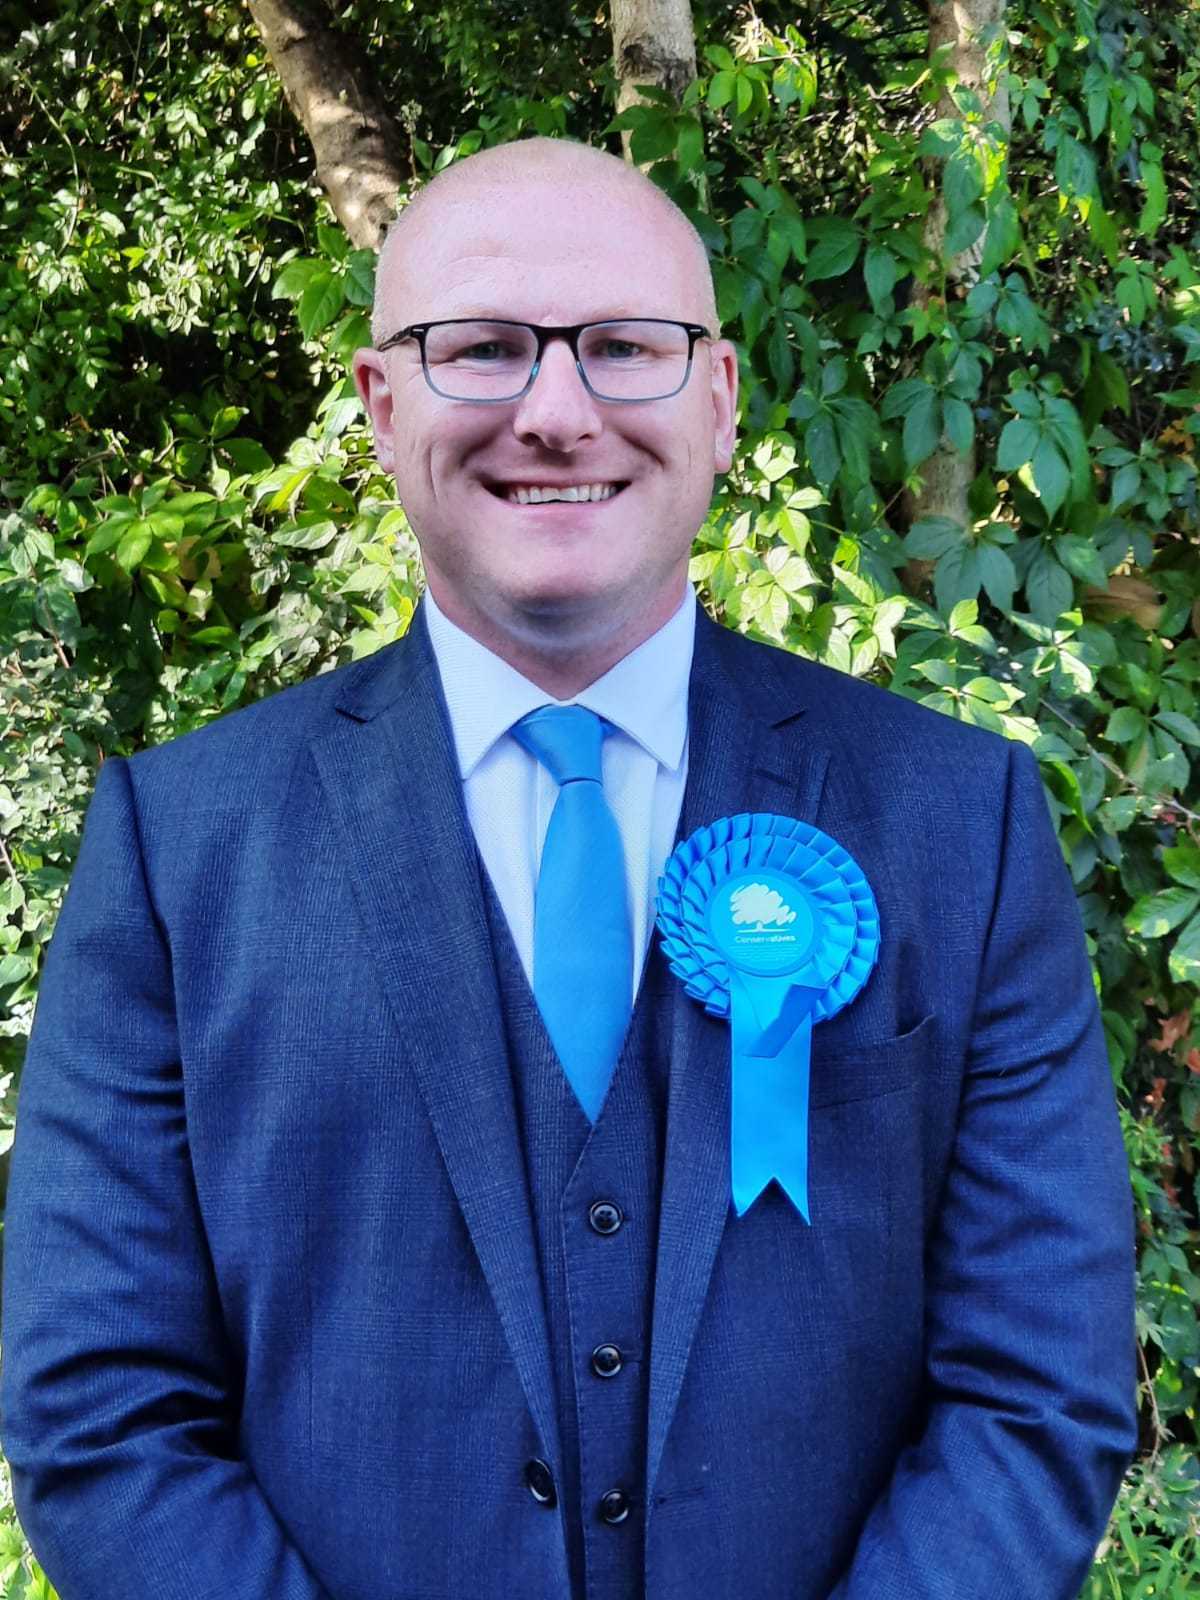 James Geddes, the Conservative Party candidate in the Leigh West by-election. Credit: James Geddes. Caption: Joseph Timan. Permission for use for all LDRS partners.